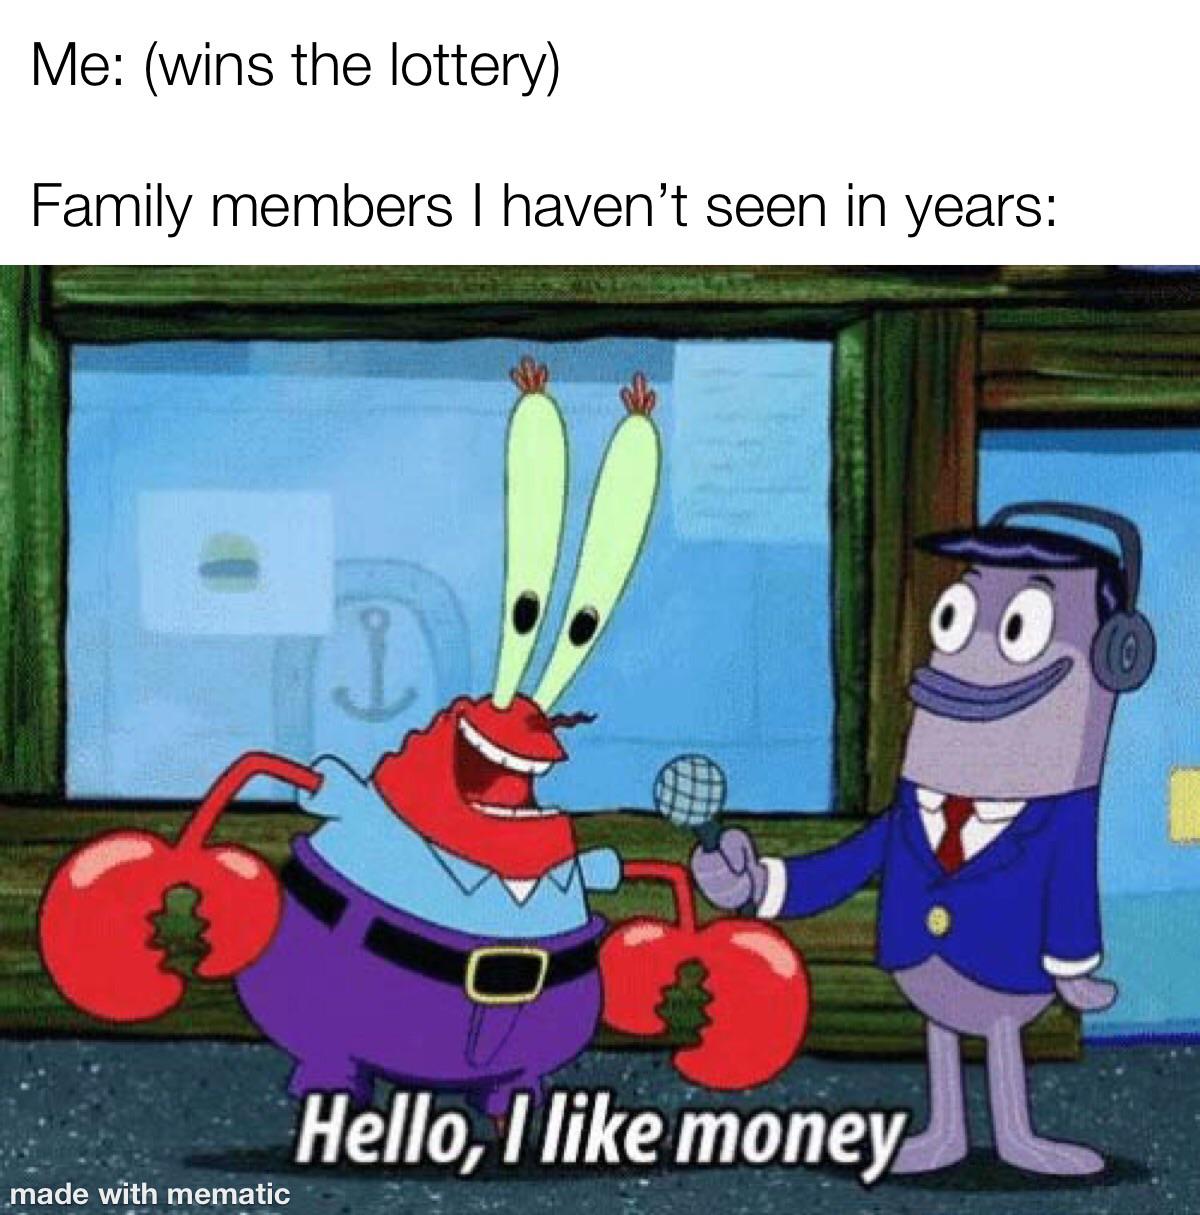 mr krabs hello i like money - Me wins the lottery Family members I haven't seen in years I Hello, I money made with mematic